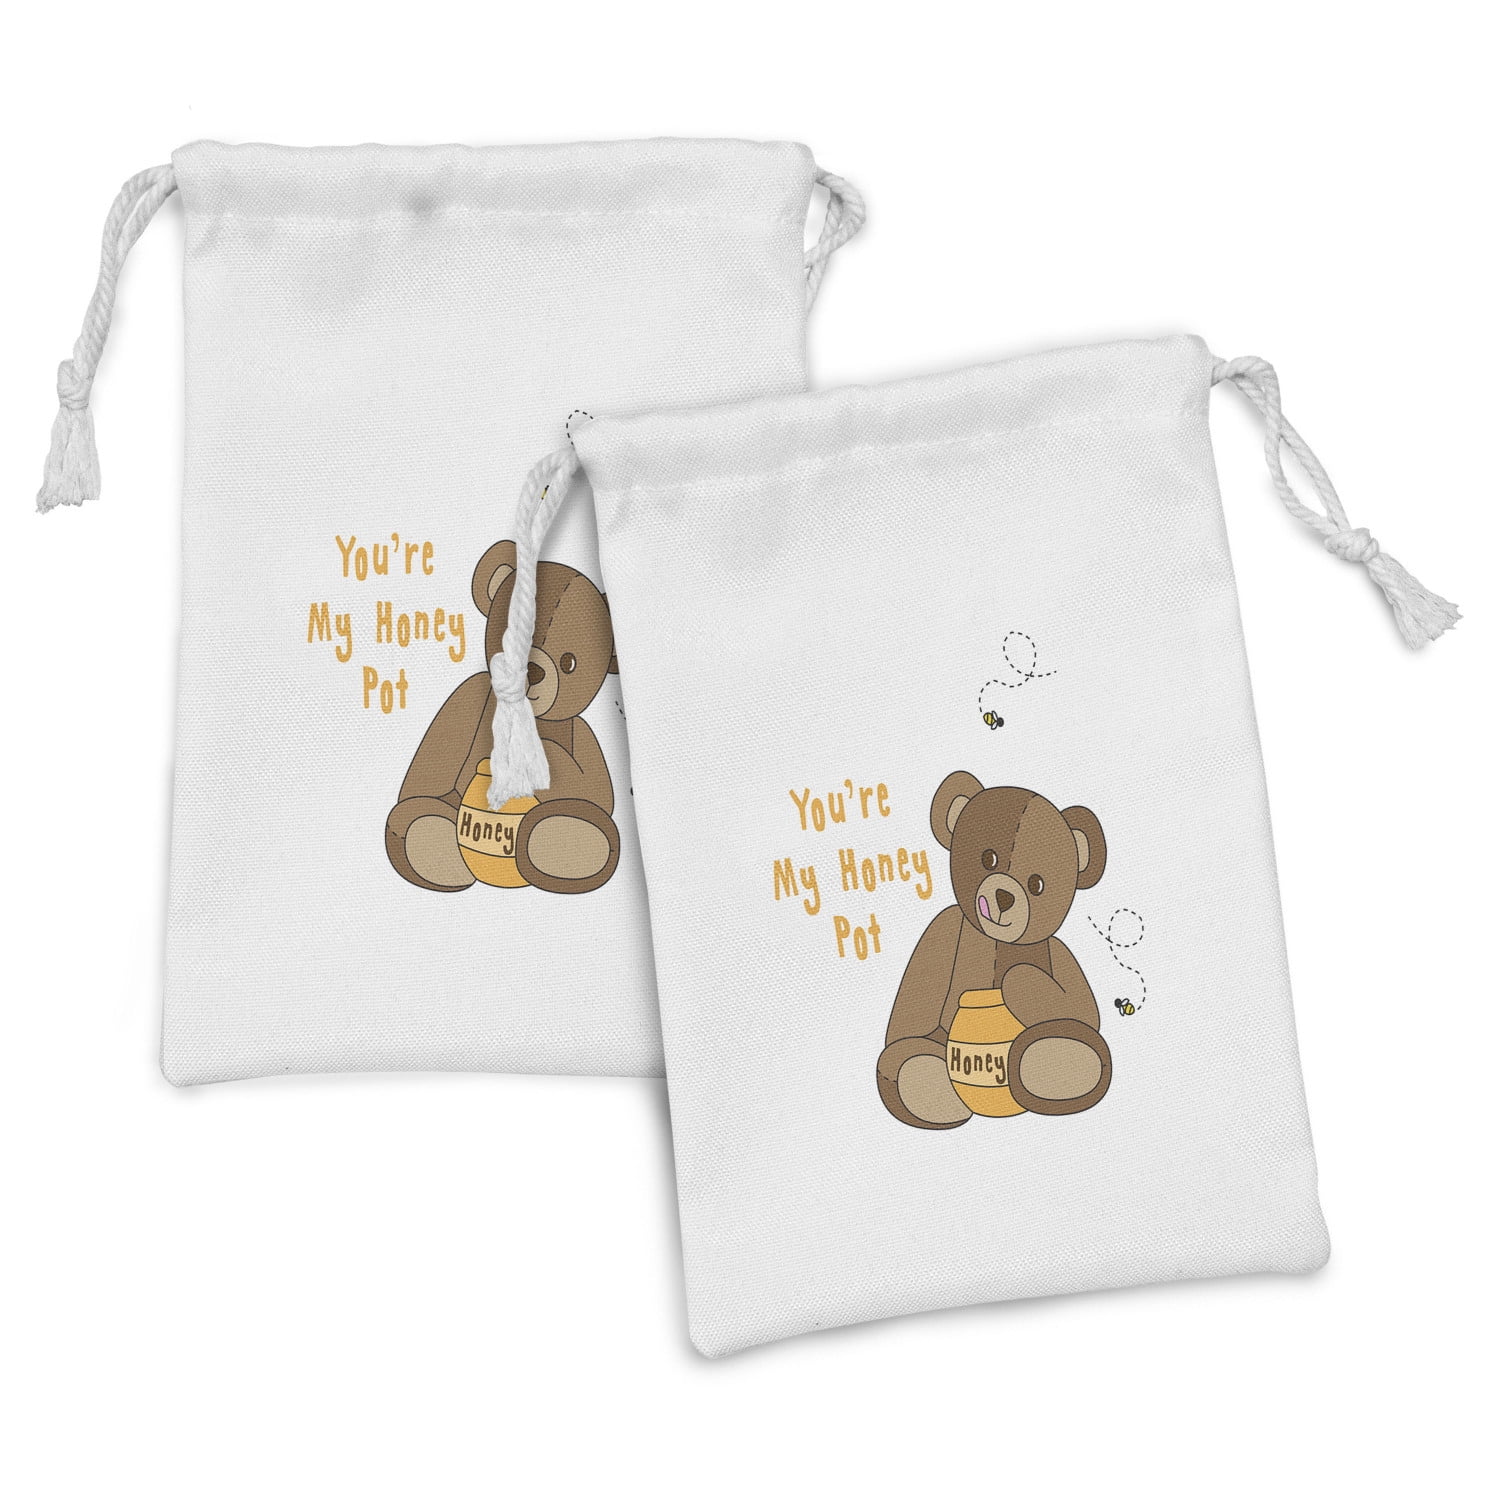 Honey Bee Fabric Pouch Set of 2, You're My Honey Pot Phrase with a